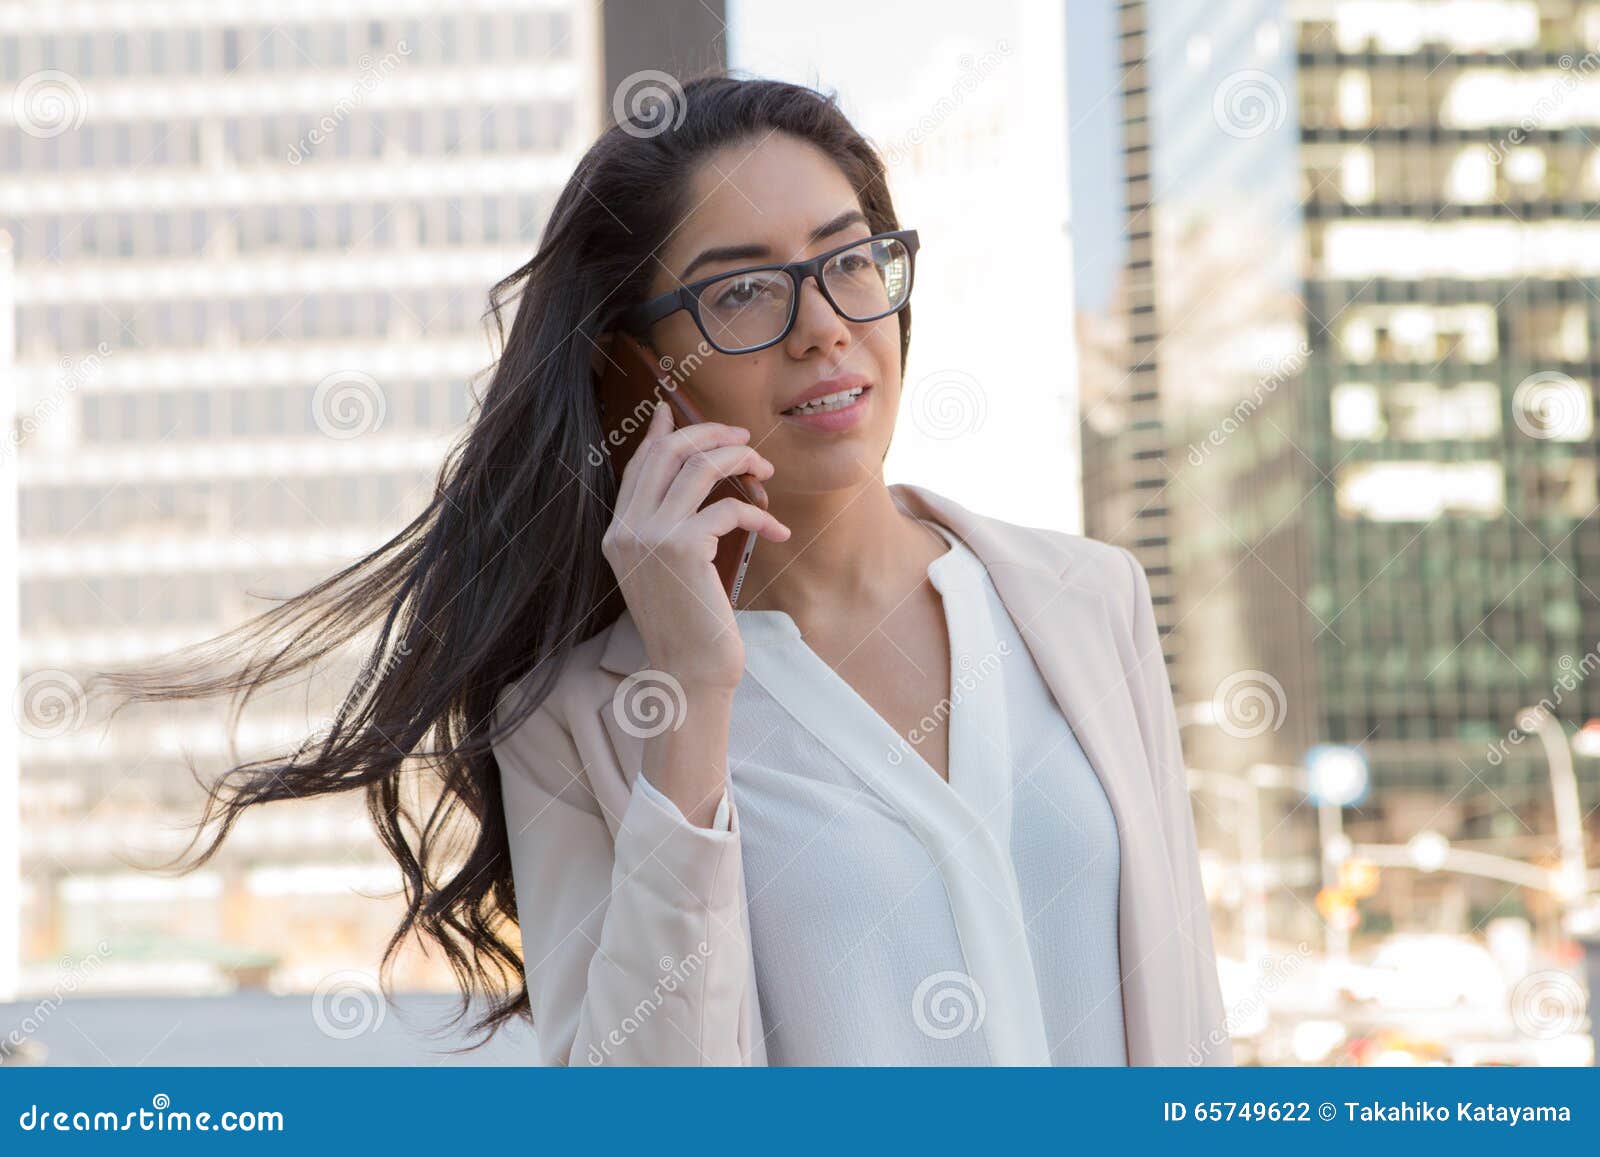 Young Latin Professional Woman with Glasses in the City Stock Photo ...